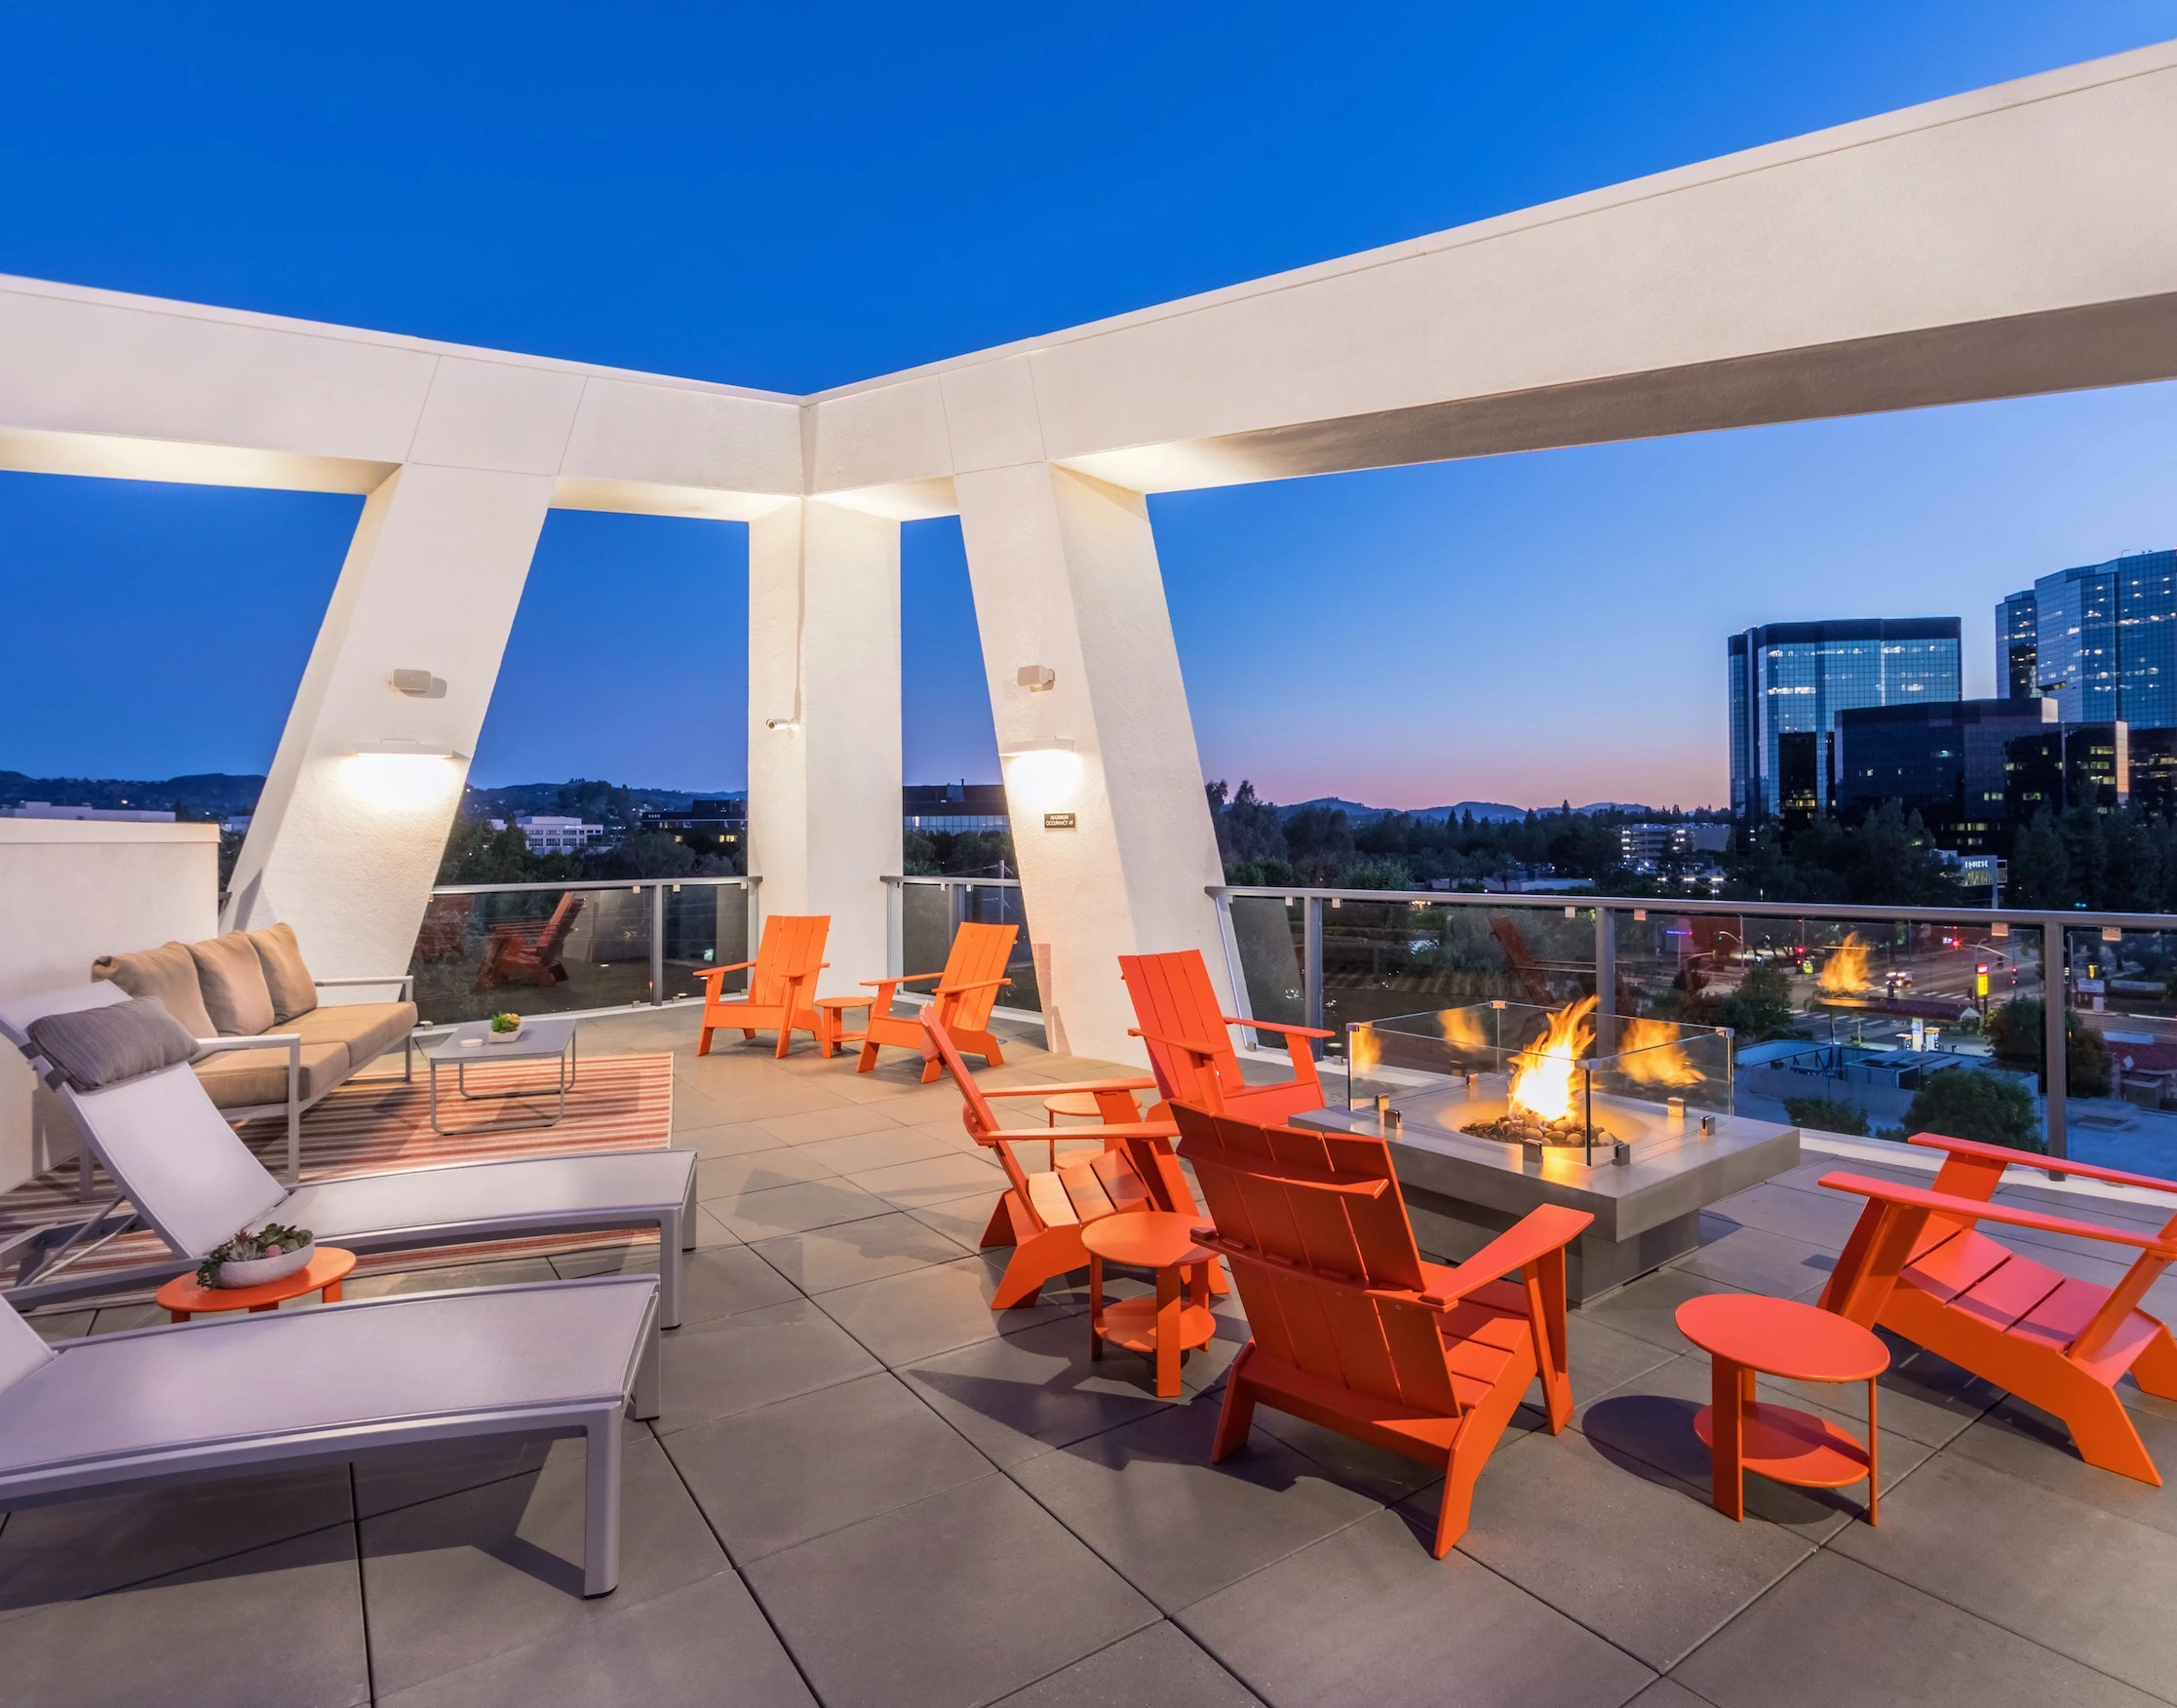 380161223317521248-10-amenity-tower-rooftop-lounge-fire-pit-night-at-vela-on-ox-apartments-in-woodl.jpg